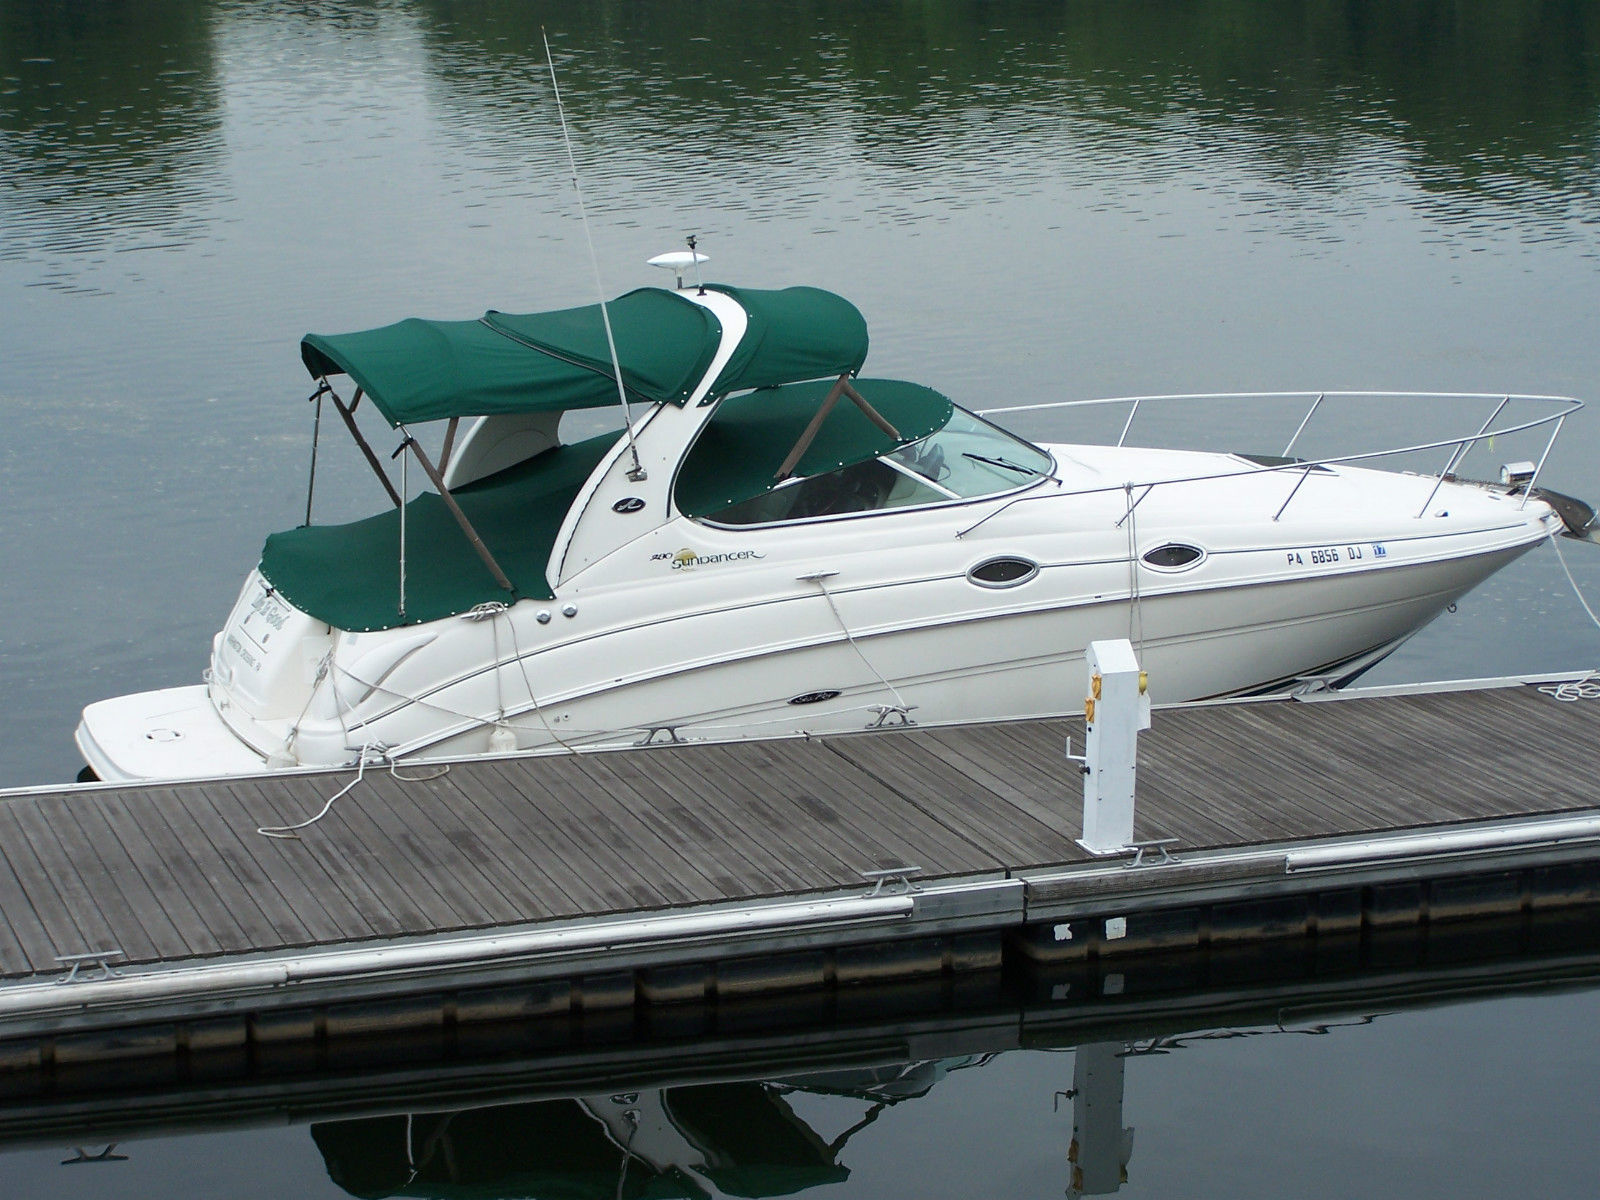 Sea Ray 280 Sundancer 2002 for sale for $5,000 - Boats 